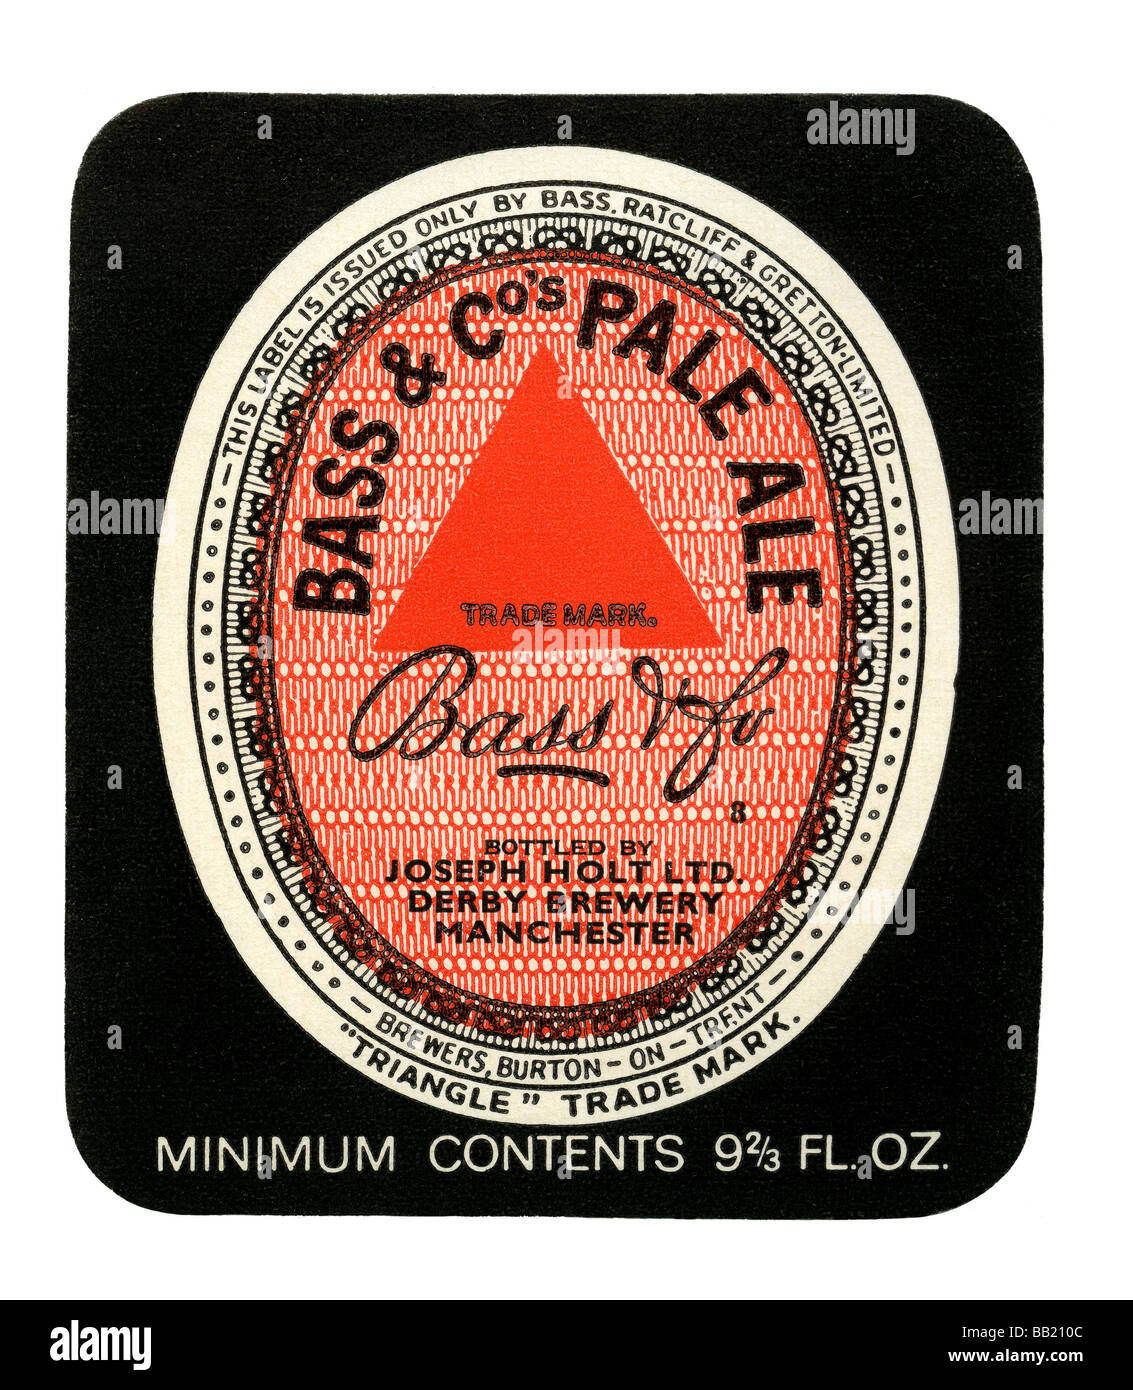 Old British beer label for Bass and Co's Pale Ale, Burton-upon-Trent, Staffordshire Stock Photo